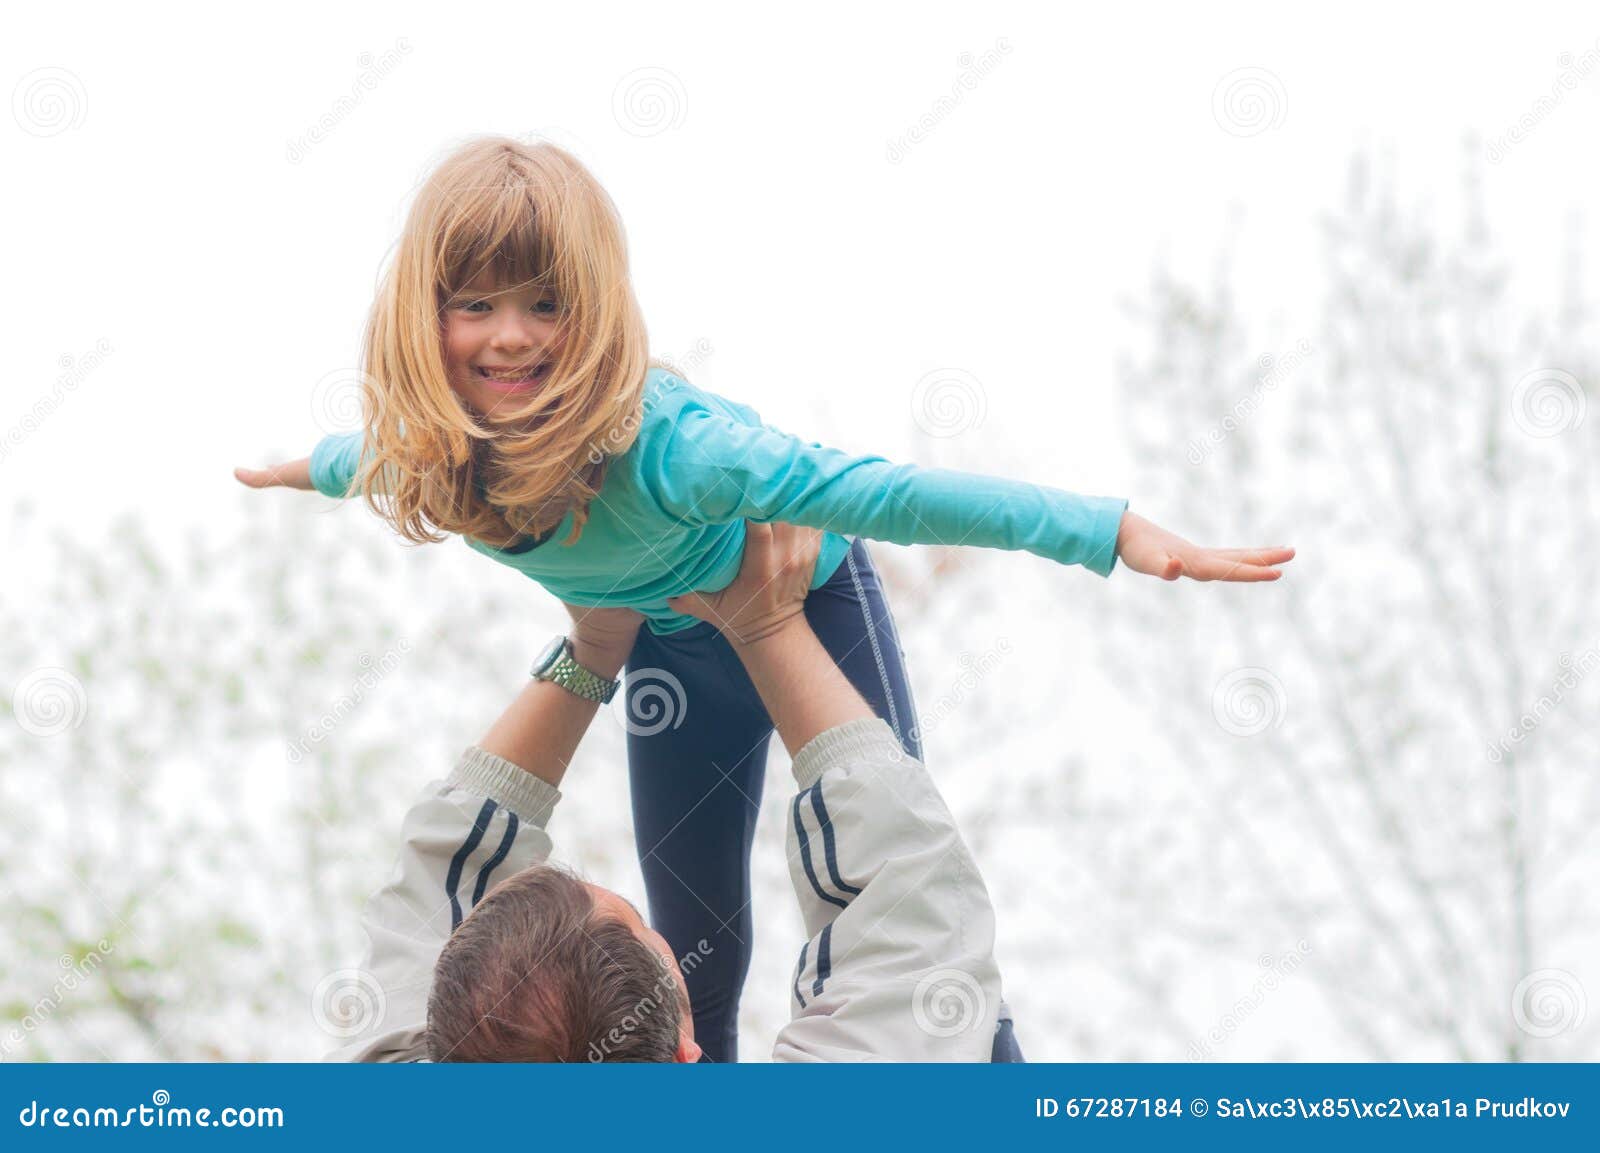 little blond girl lifted high in the air by her father outdoor